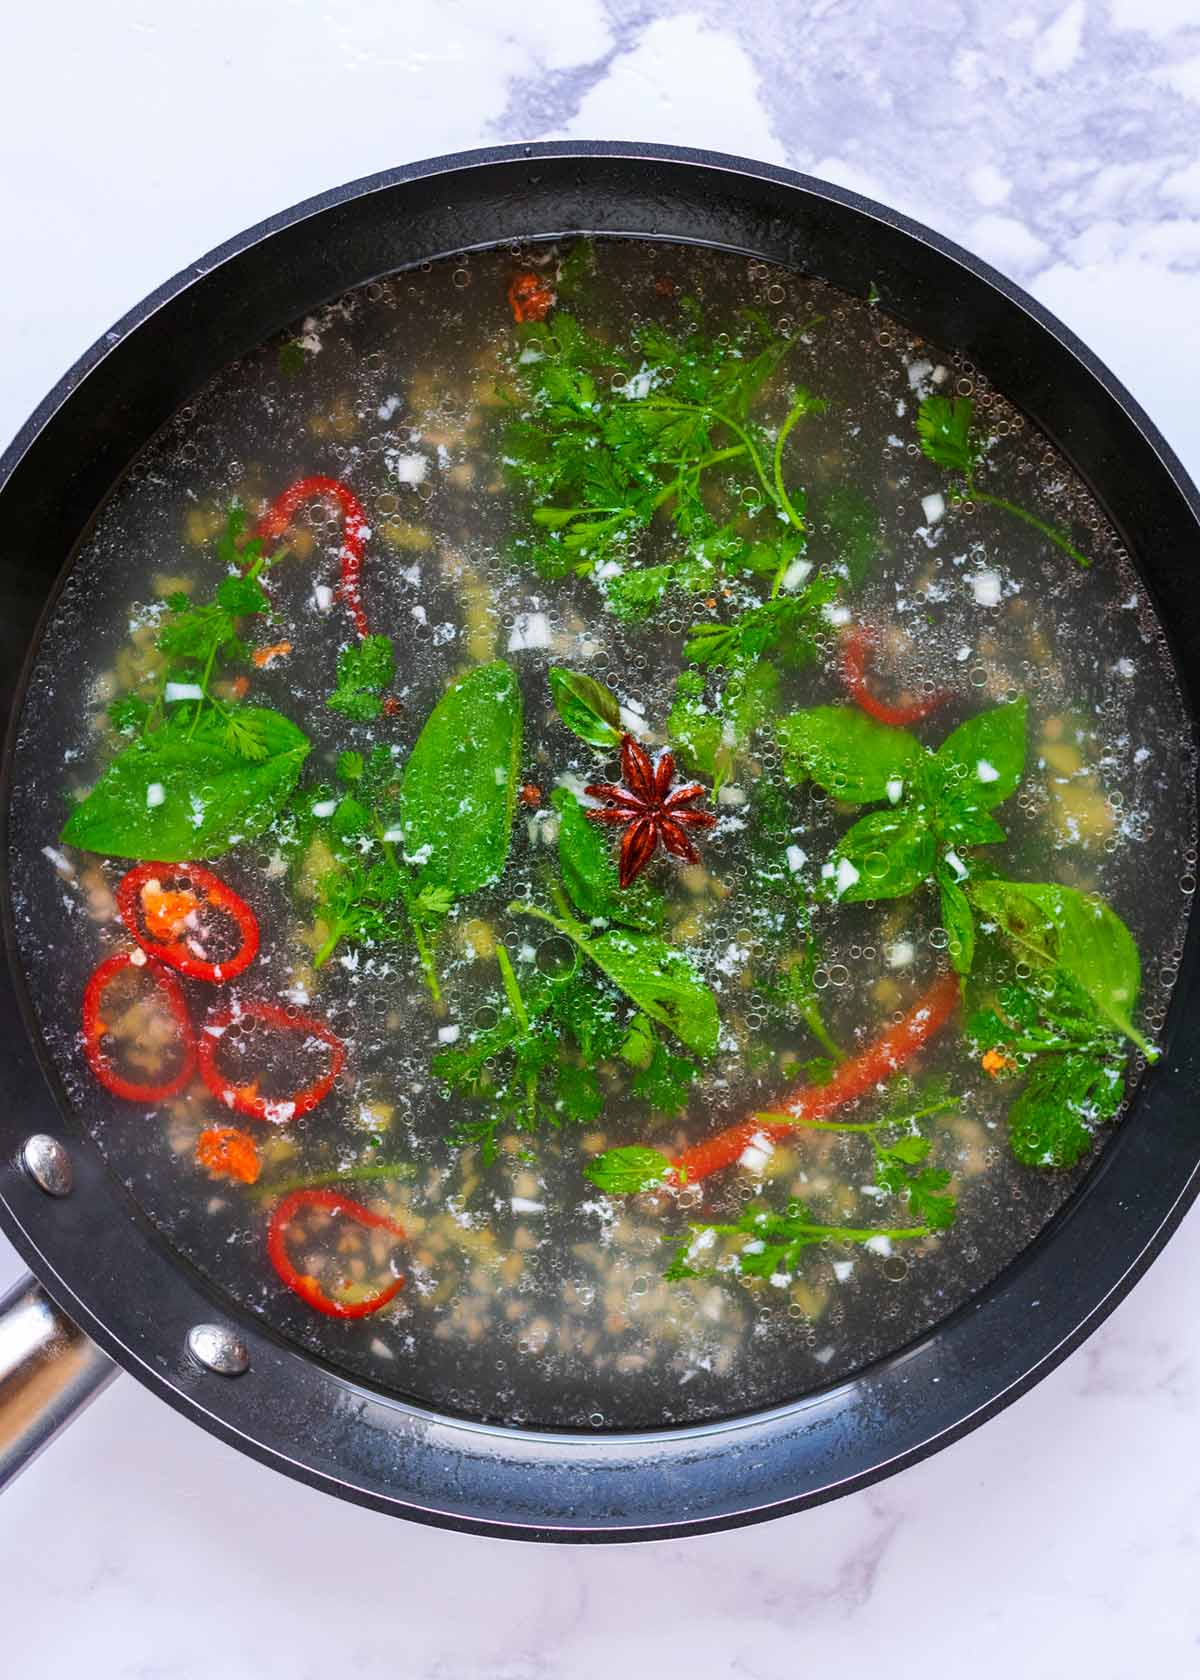 A frying pan containing a broth with herbs, chillies and spices.